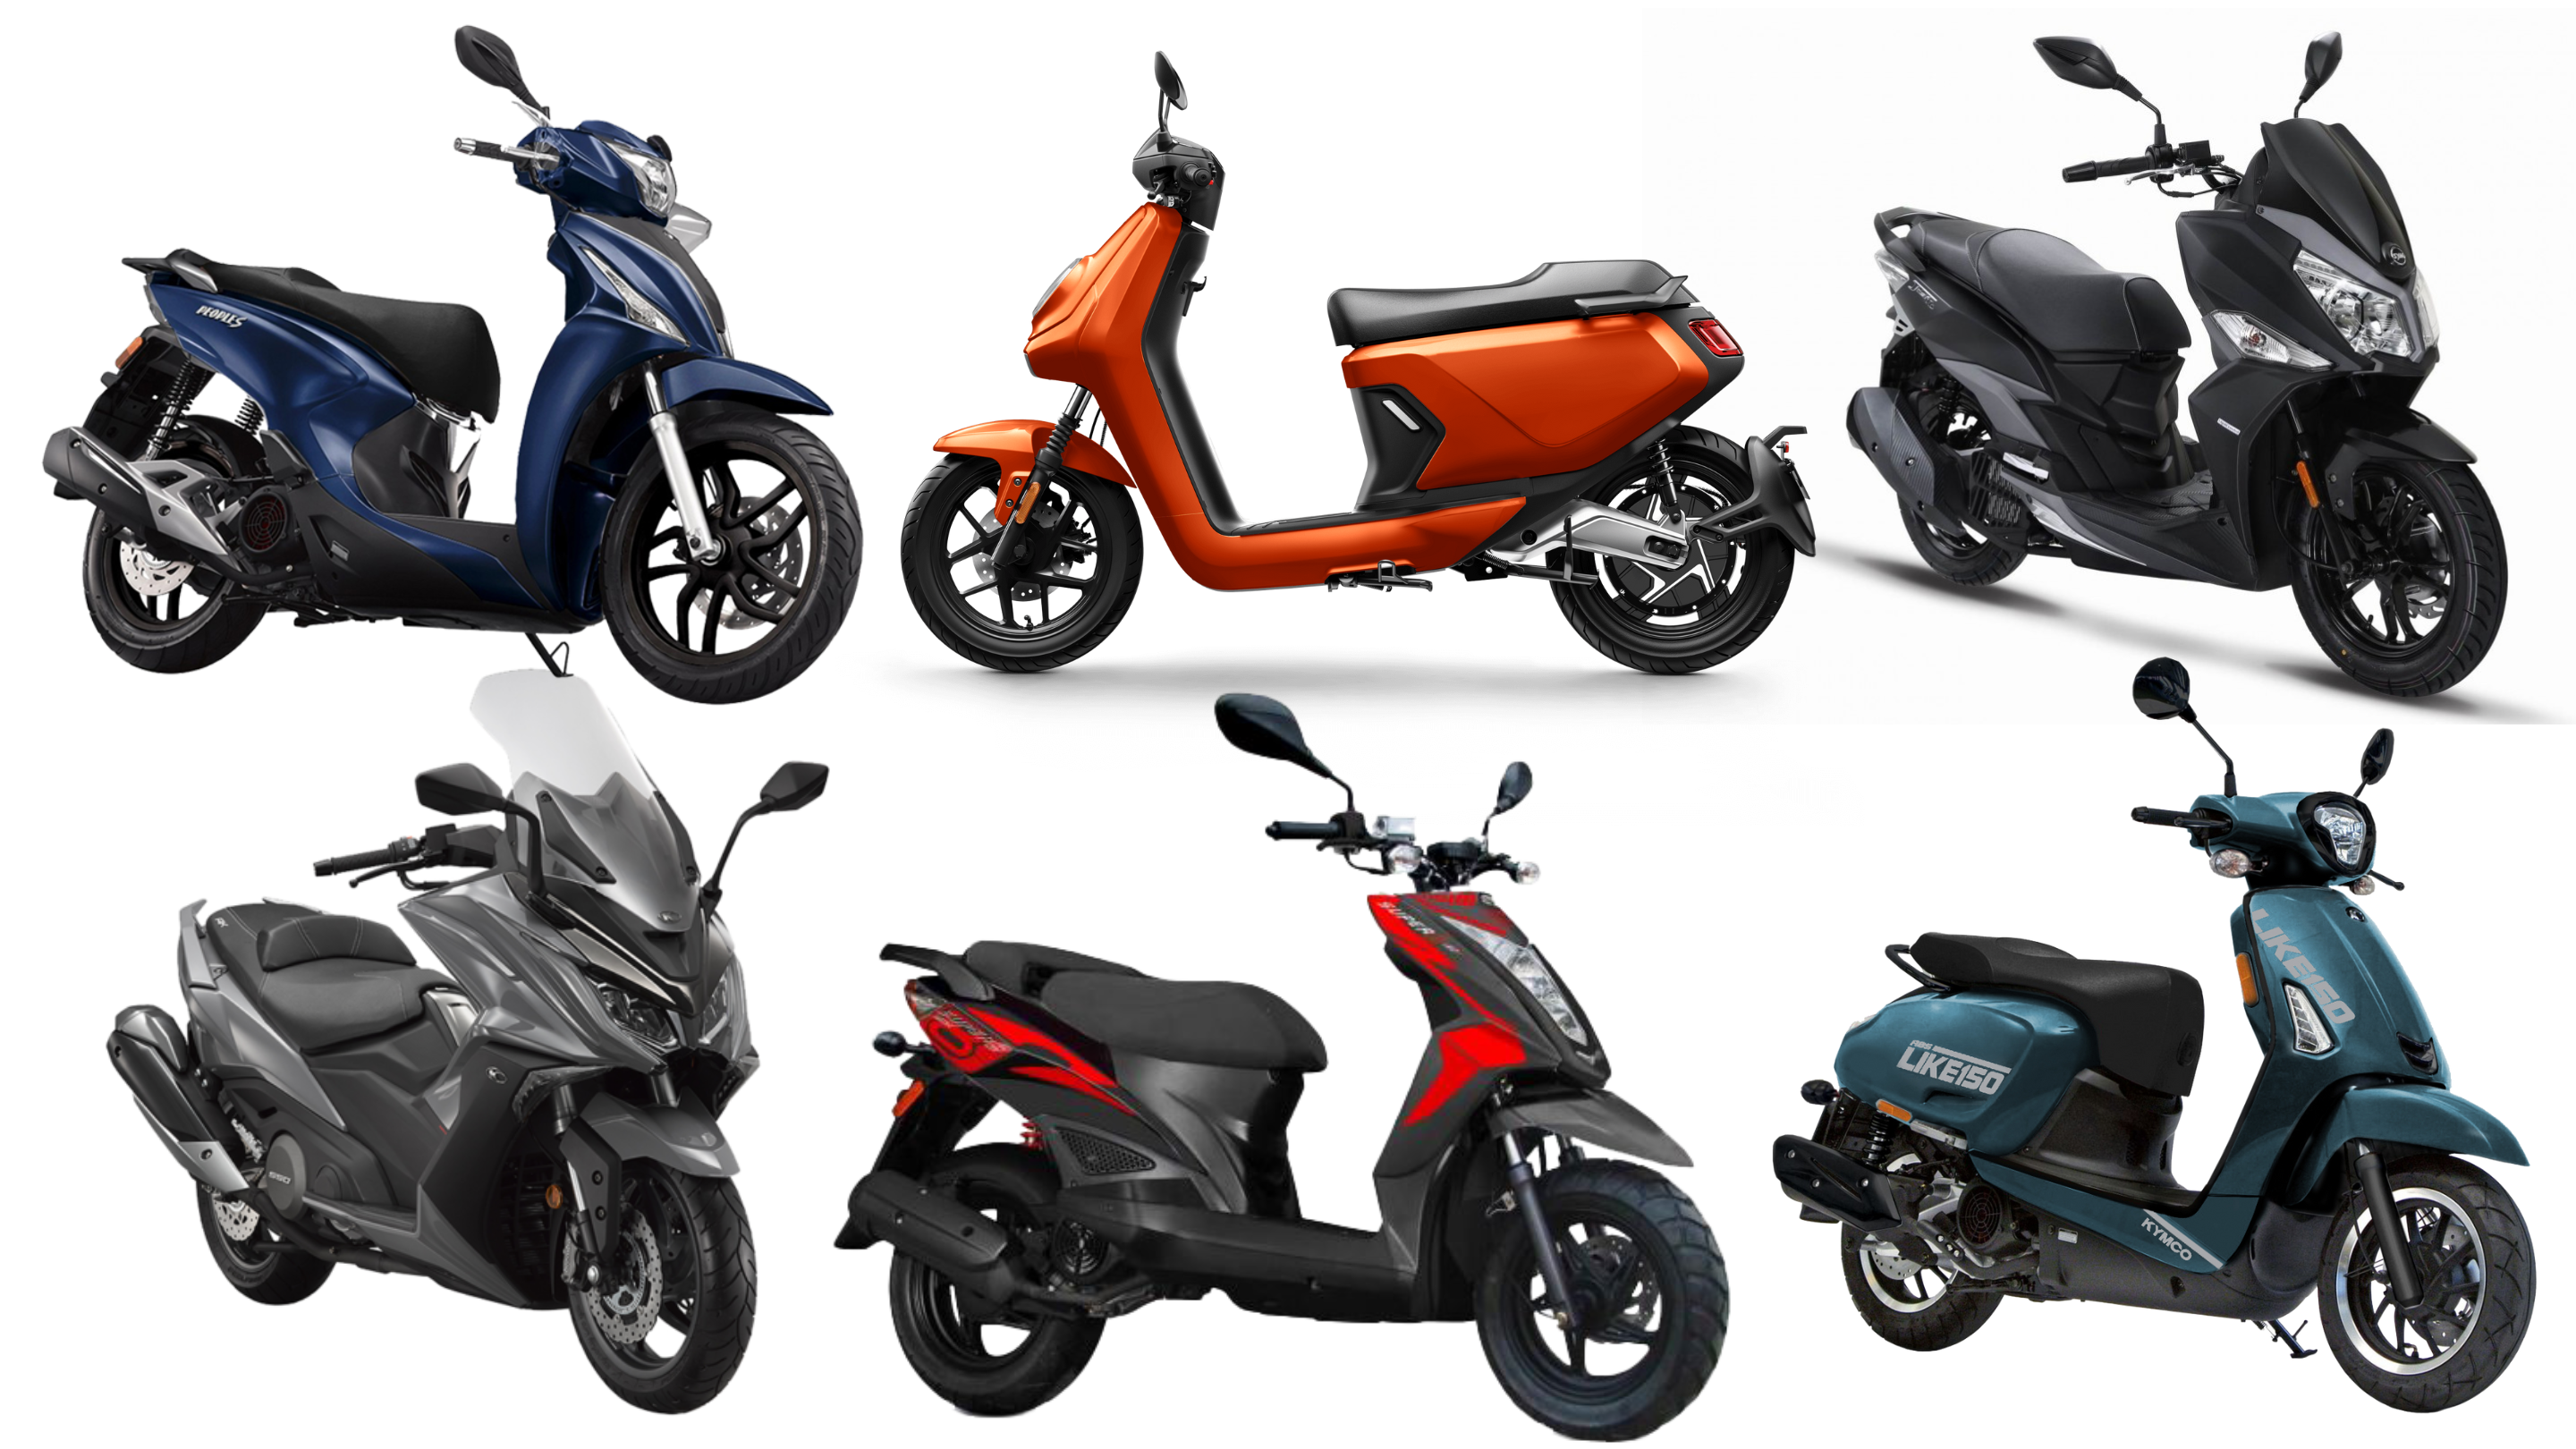 Scooter Gas and Electric Scooters For Sale | We Deliver – SCOOTERSTOP.com